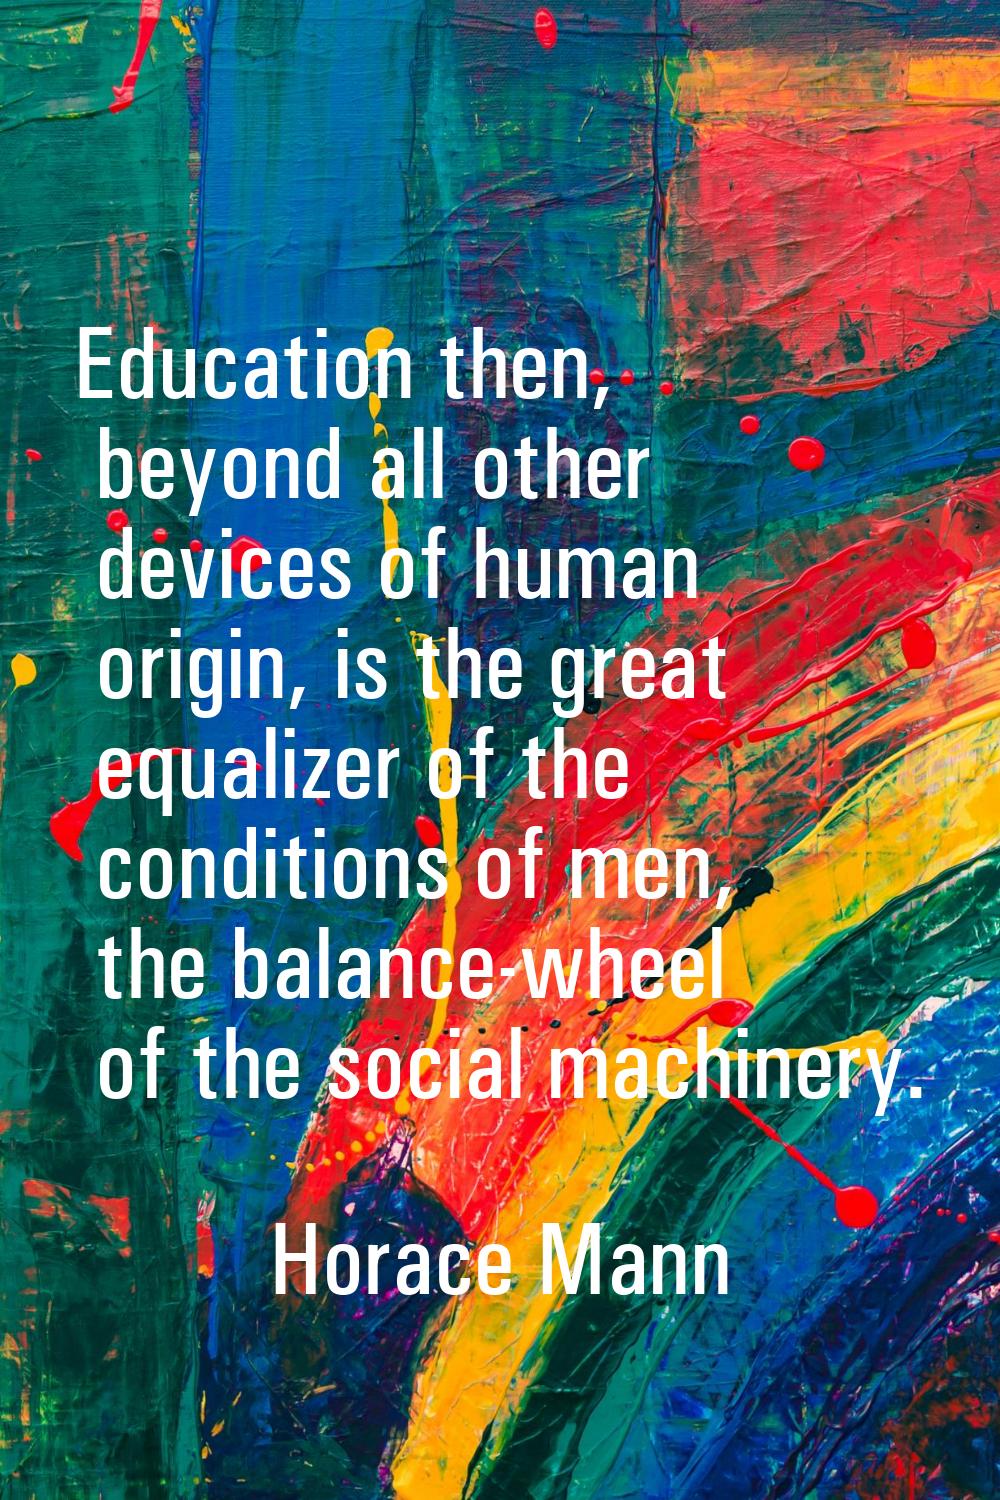 Education then, beyond all other devices of human origin, is the great equalizer of the conditions 